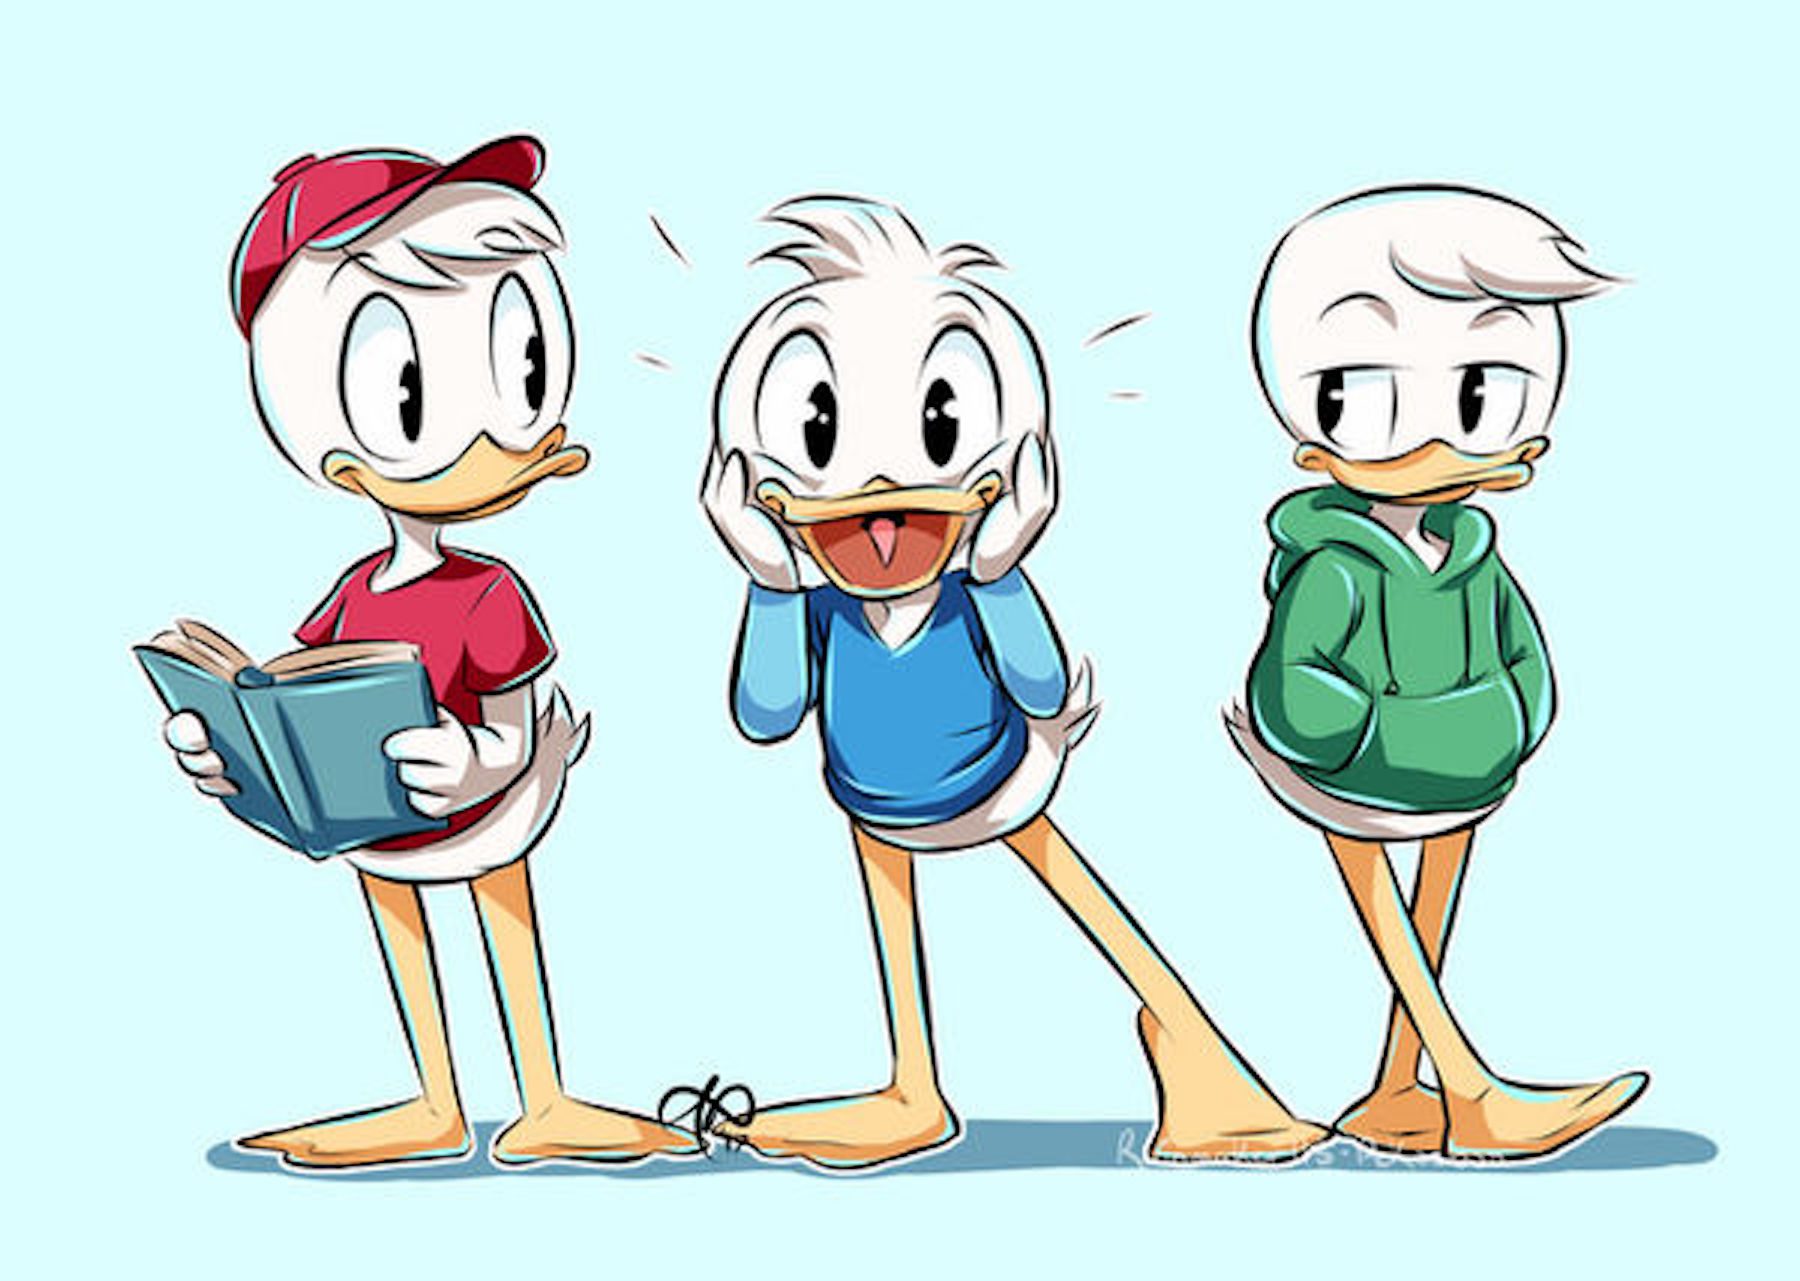 Huey, Dewey, and Louie from DuckTales, standing in their signature colors of red, blue, and green shirts. 